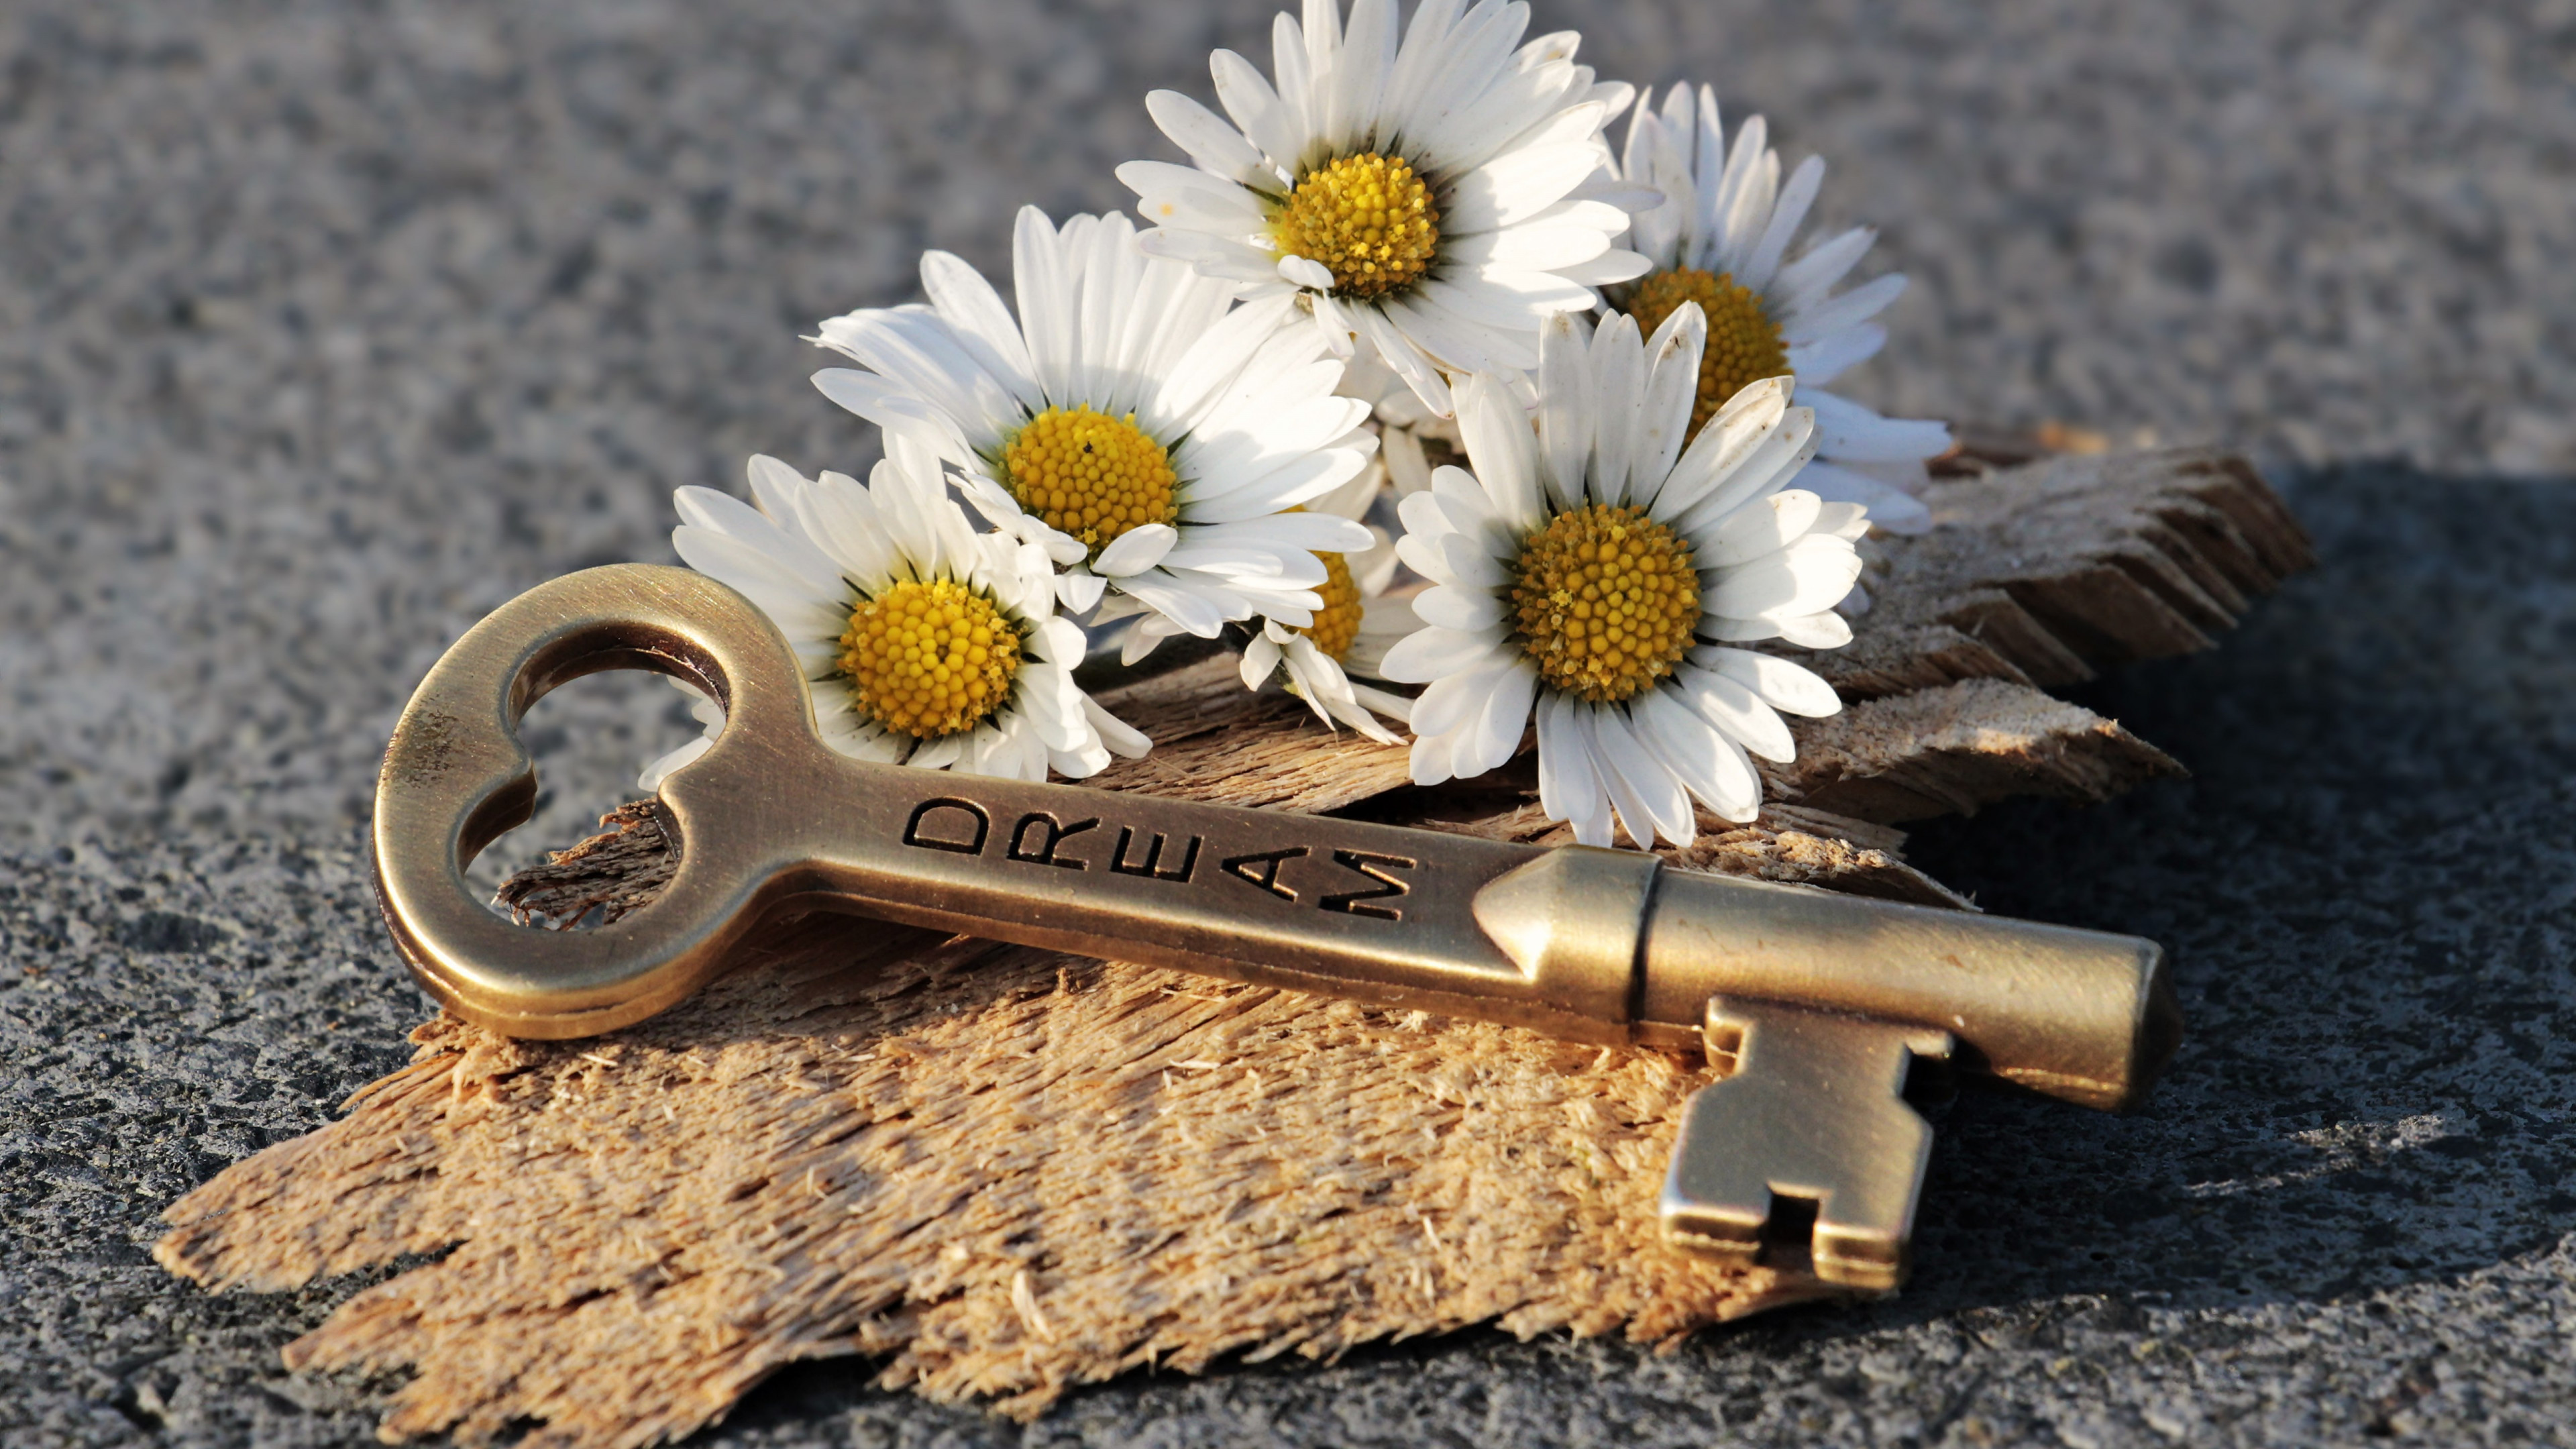 The dreams key and daisy flowers wallpaper 3840x2160